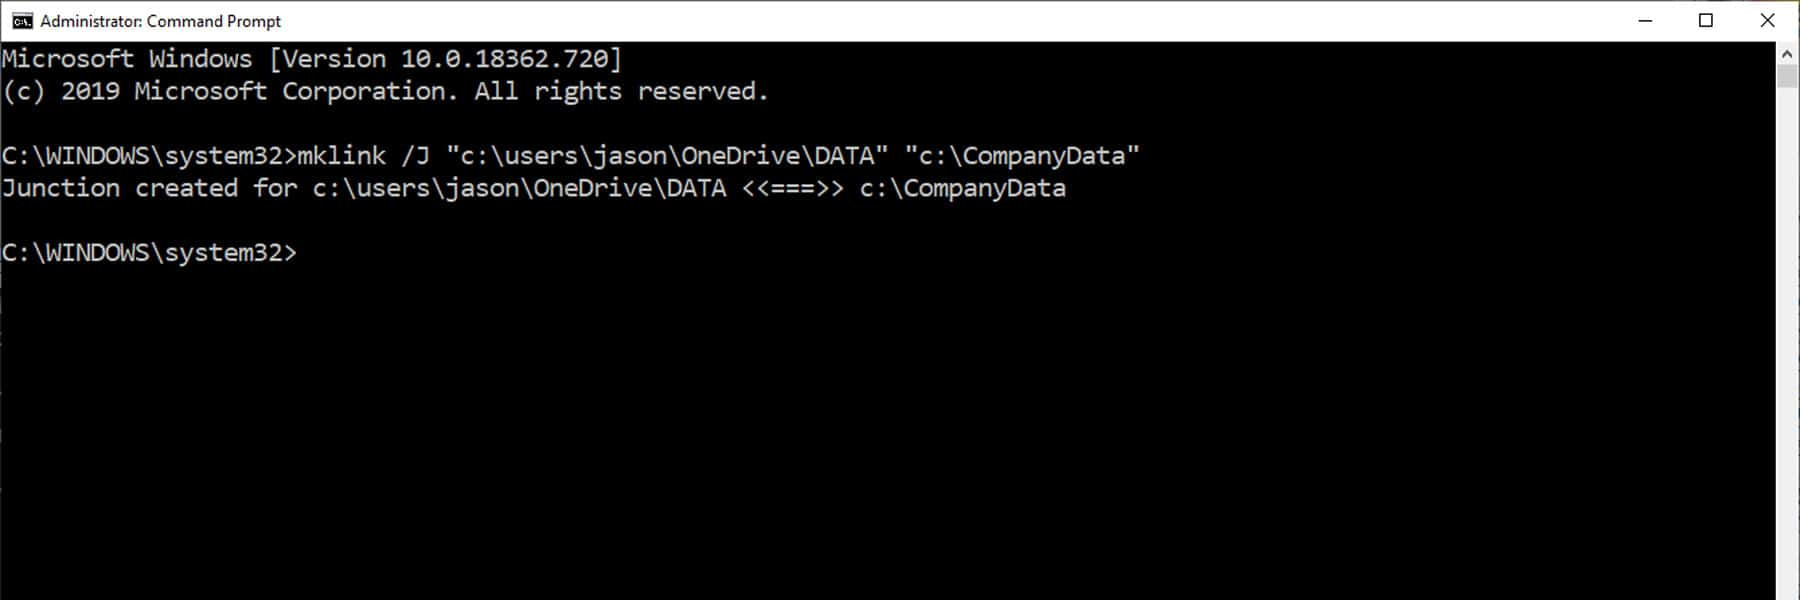 mklink symbolic link creation for shared company data - used in OneDrive external syncing